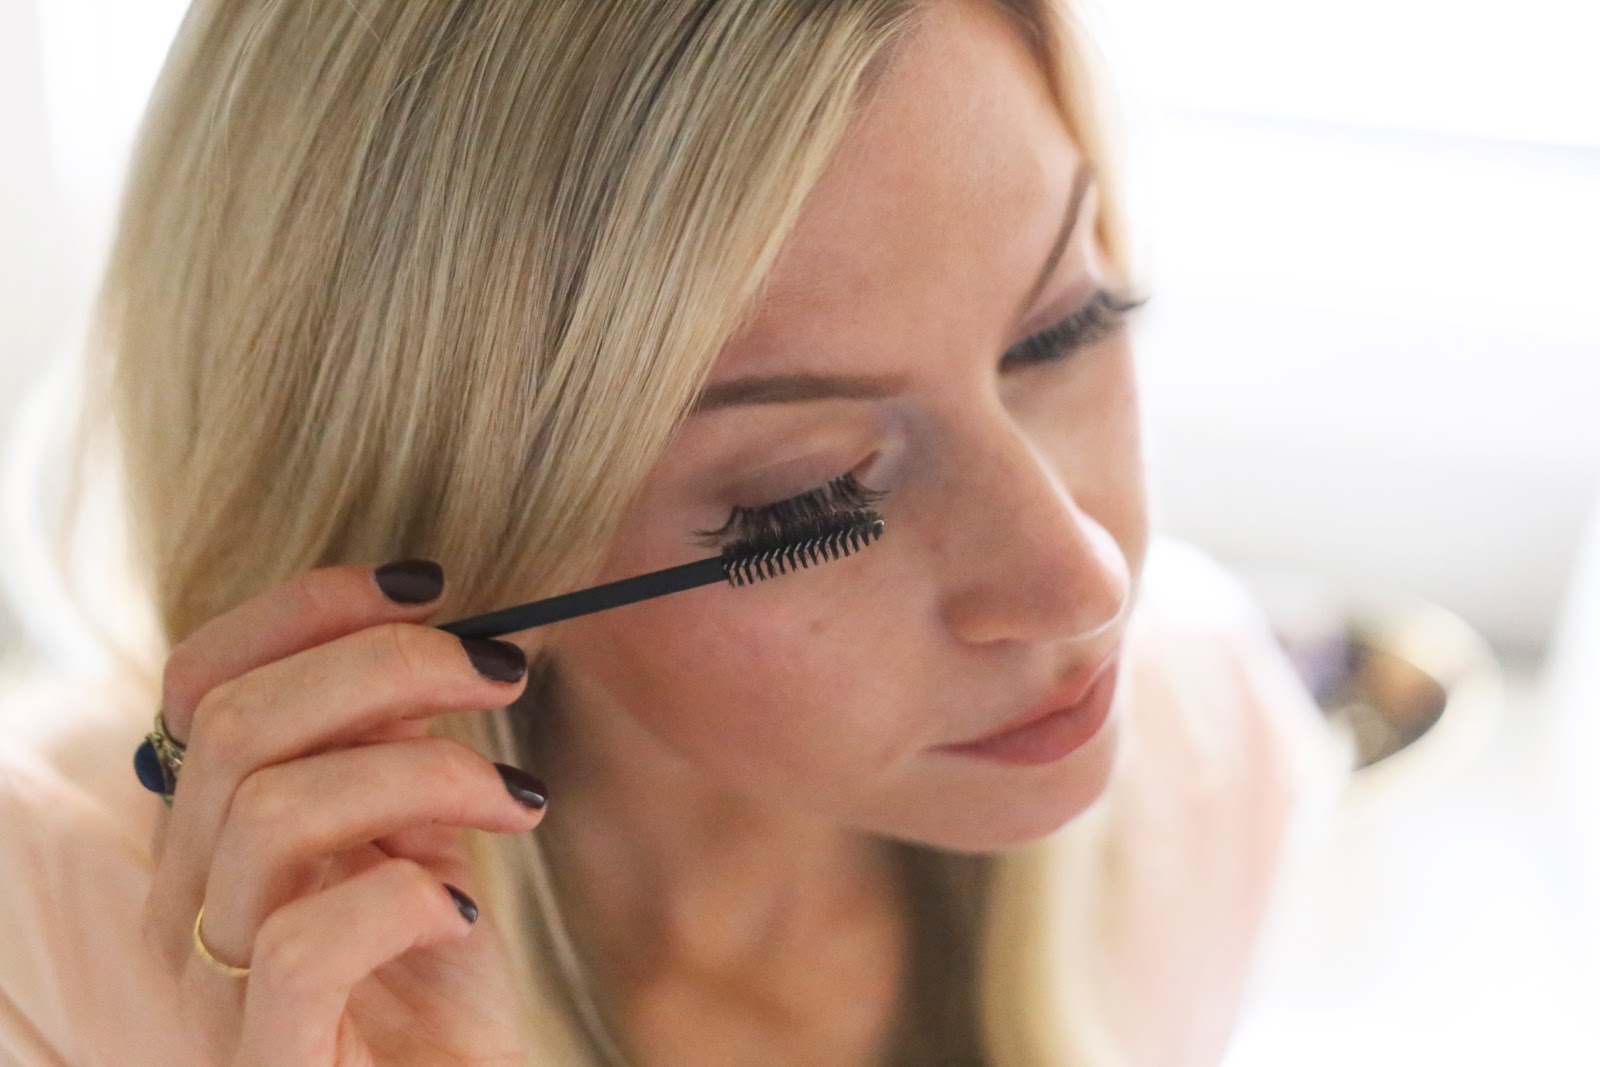 How to Wear Fake Eyelashes for Beginners-Step by Step Tutorial#